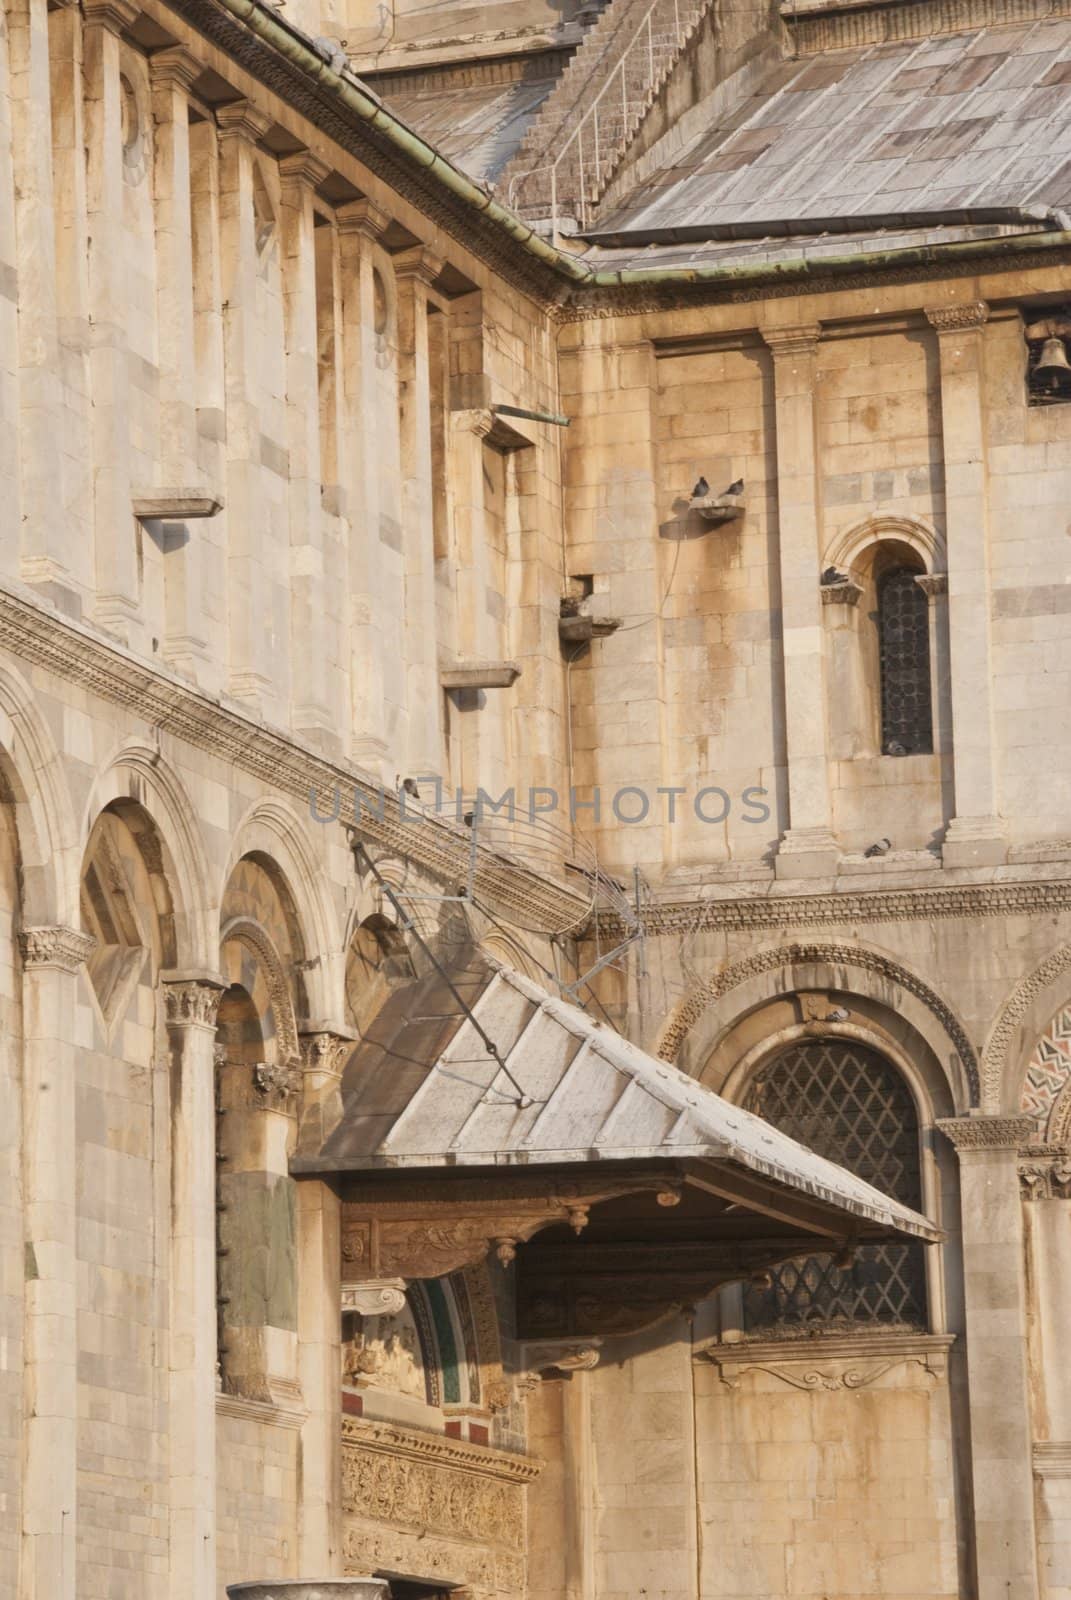 Architectural Detail of Piazza dei Miracoli, Pisa, Italy by jovannig